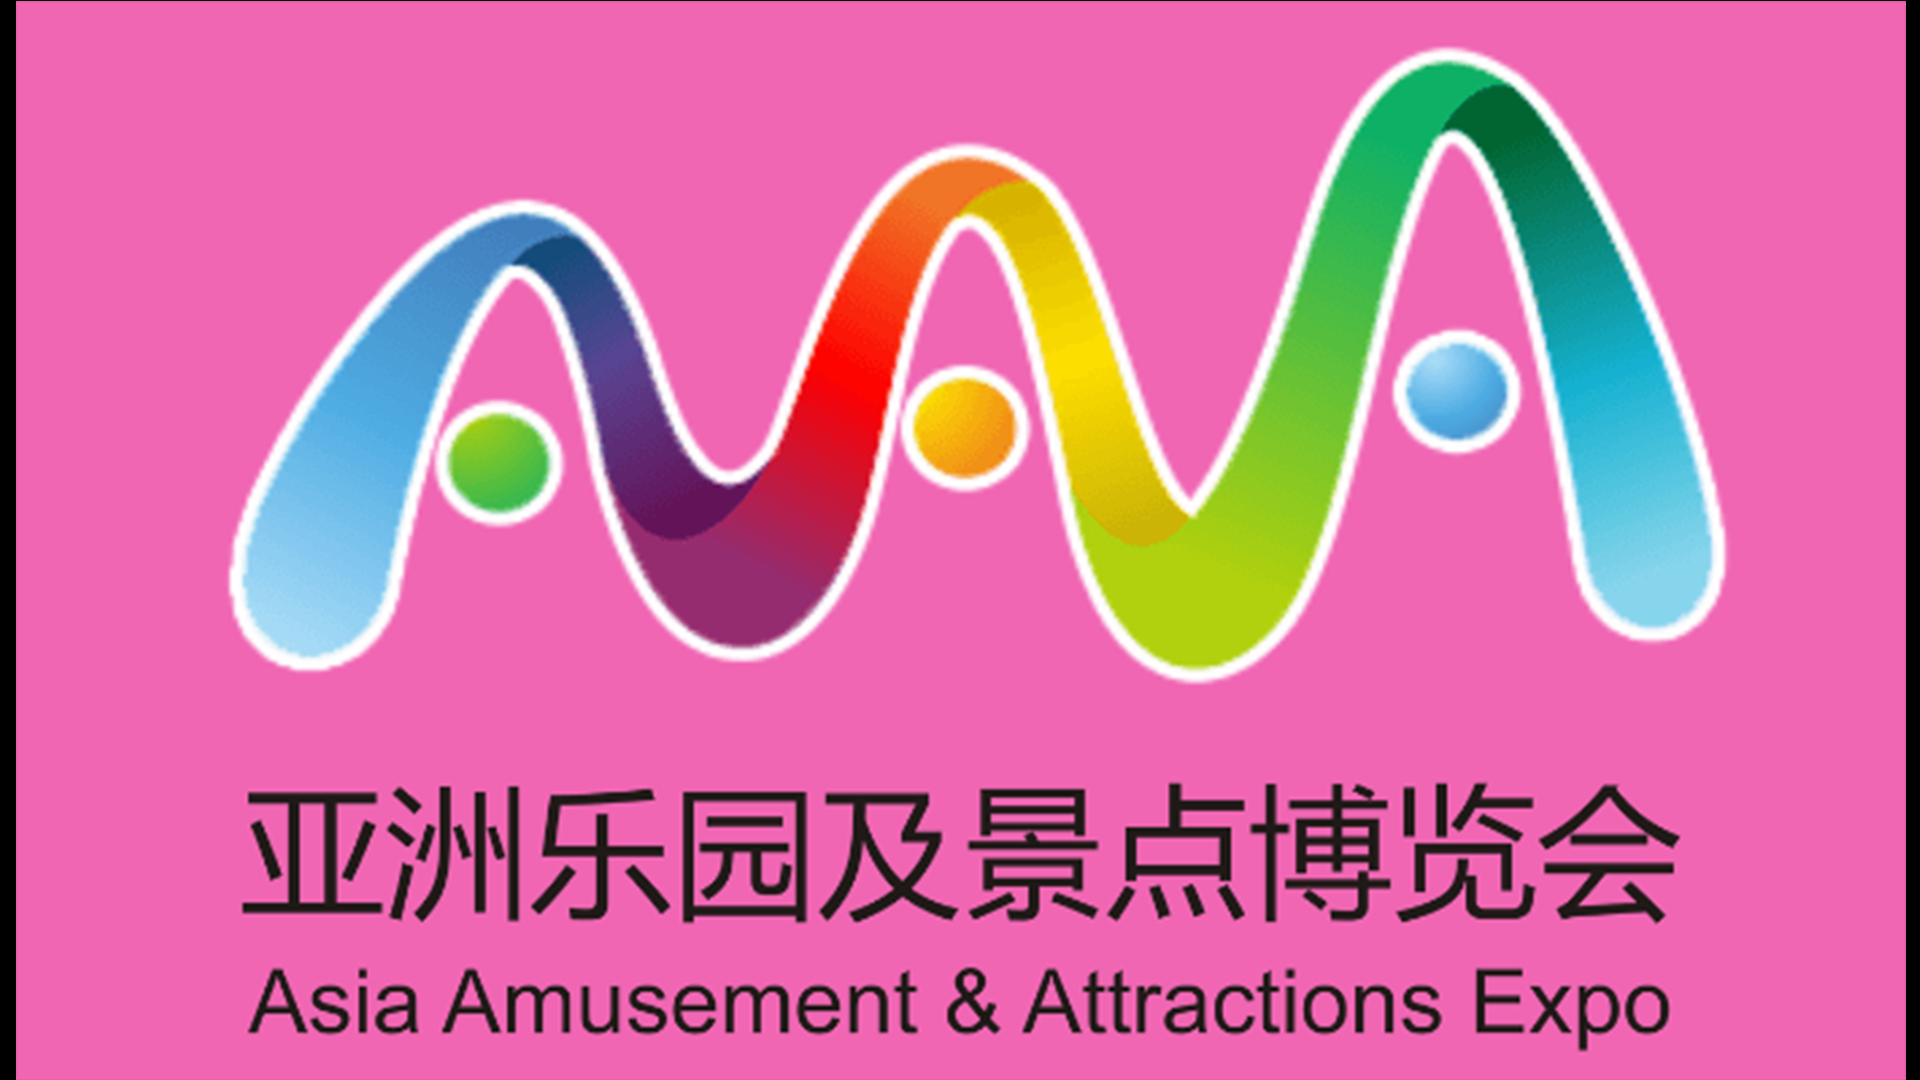 Asia Amusement & Attractions Expo (AAA 2020)